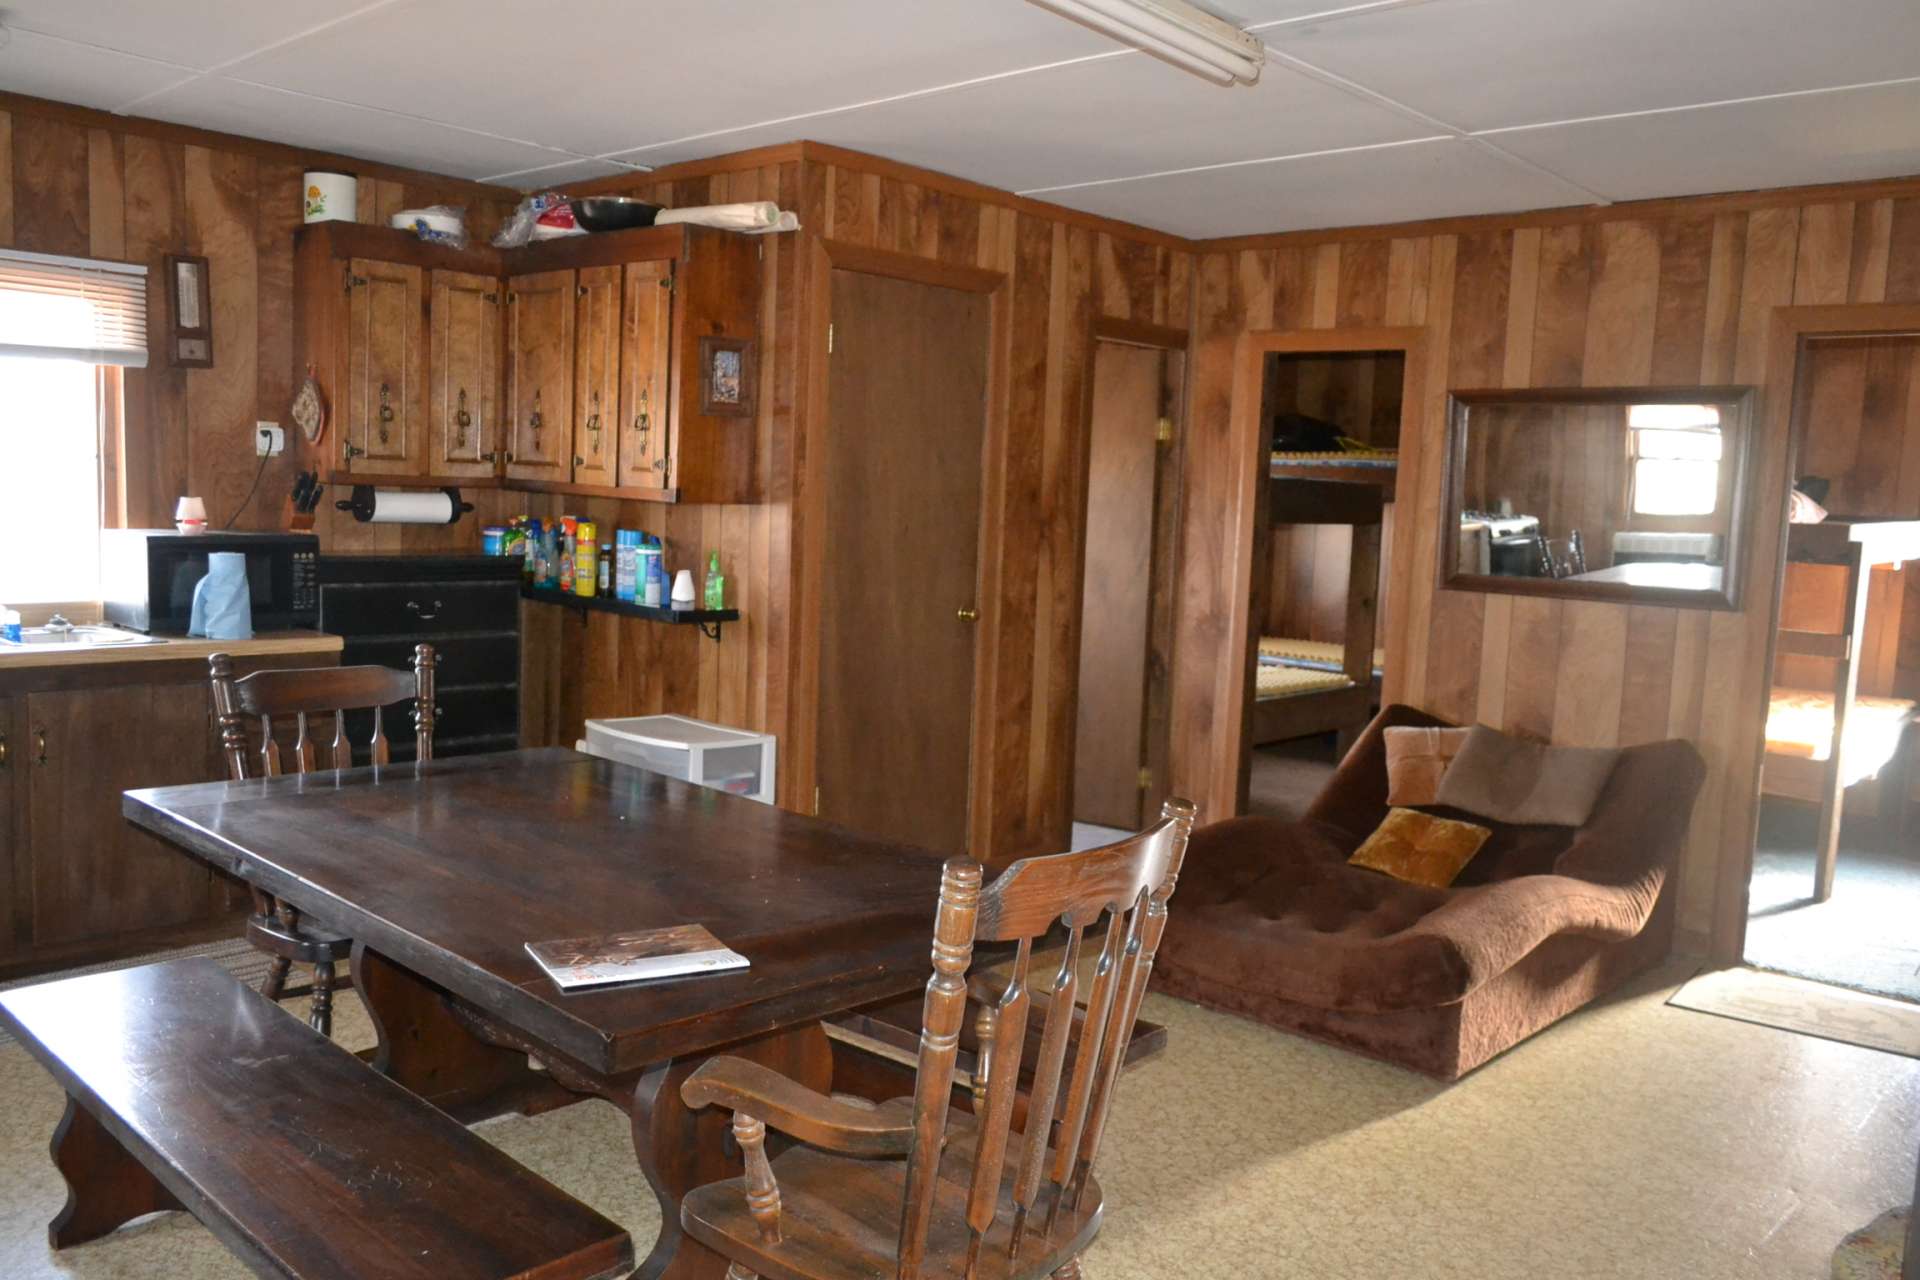 The cabin also includes 2-bedrooms and a full bath.